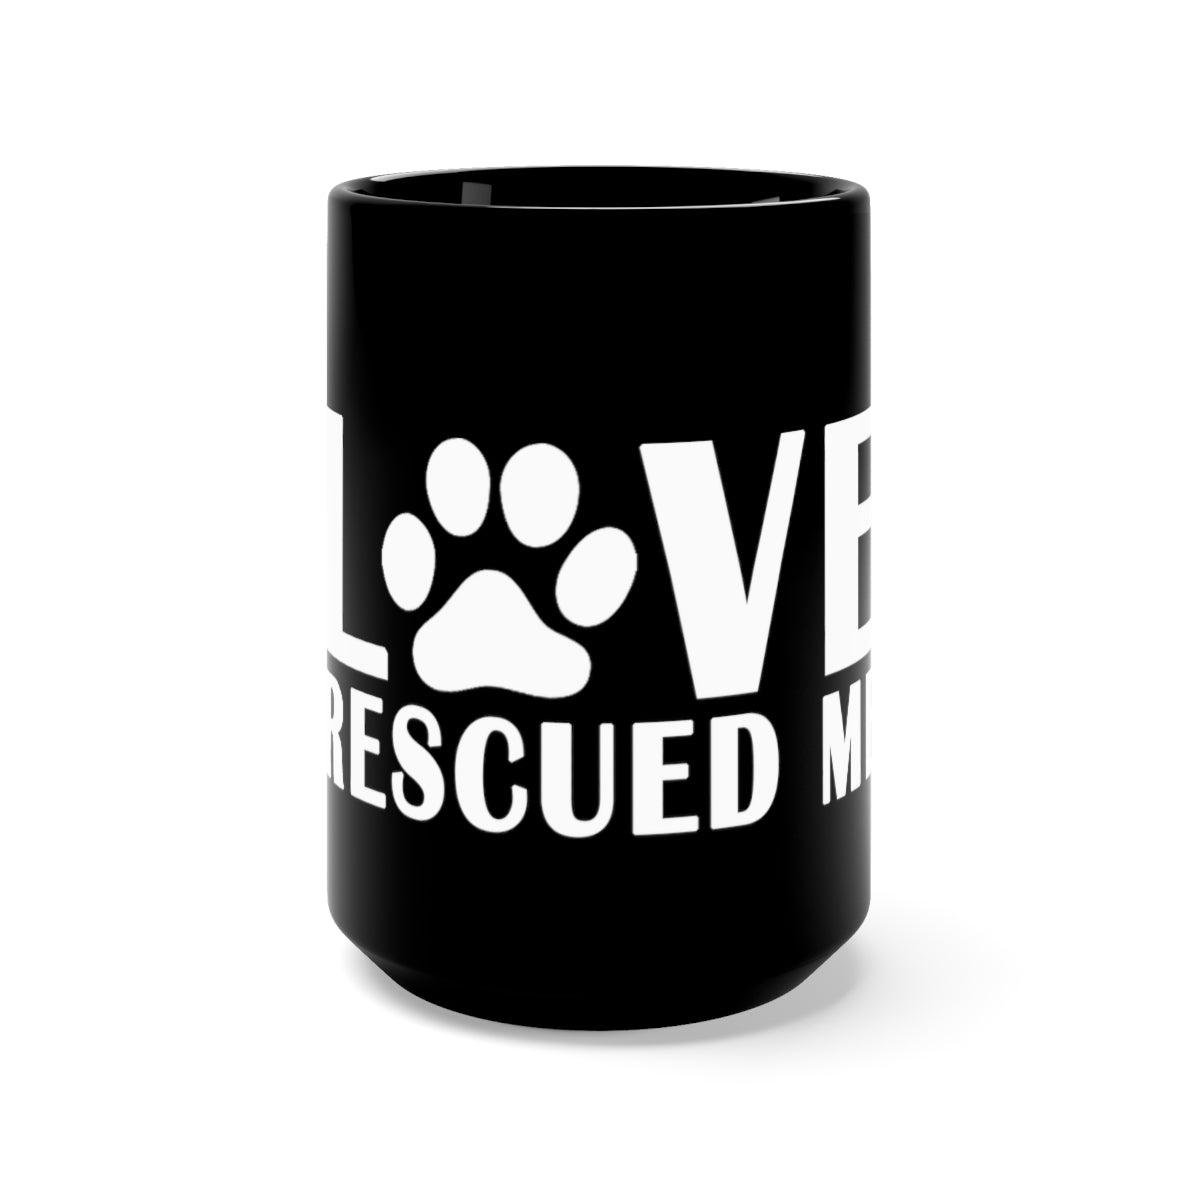 Dog Love Rescued Me Mug | Dog Lover's Mug | Perfect gift for the dog lover in your family!